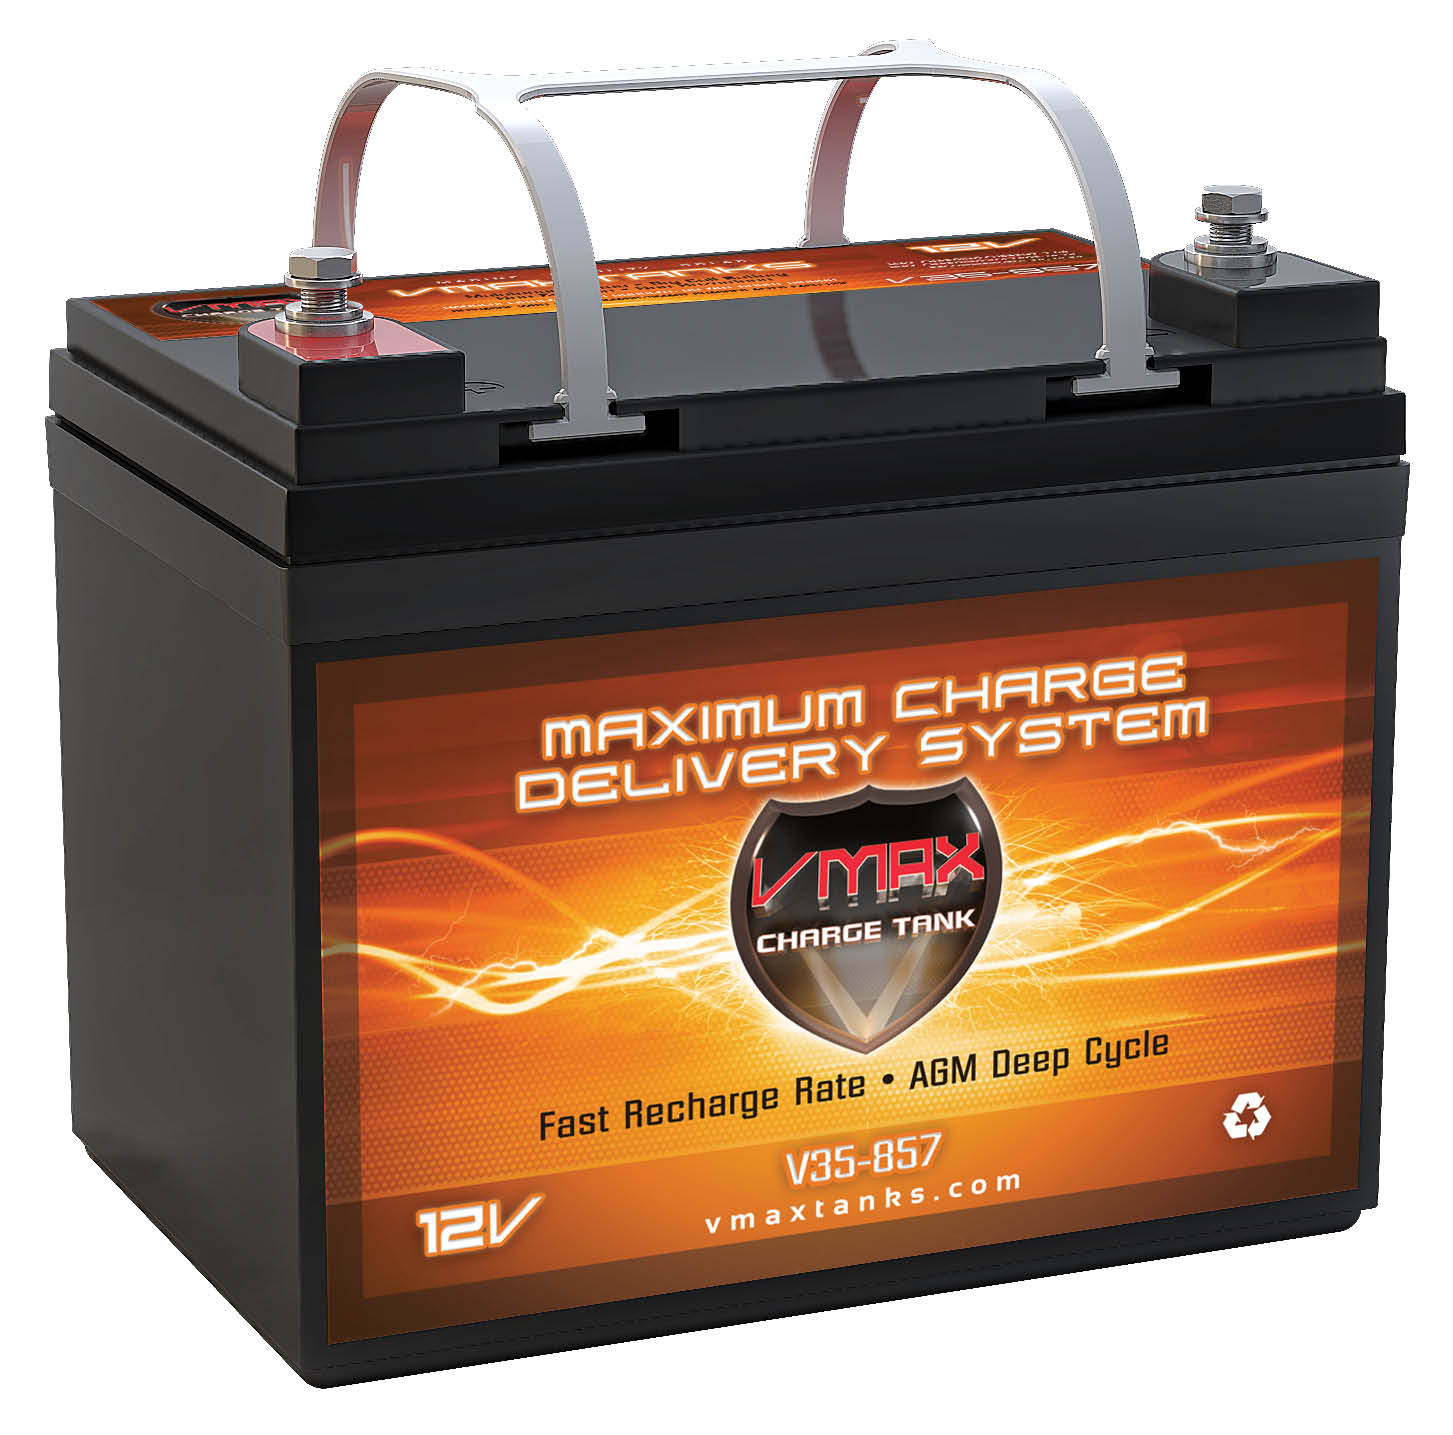 VMAX V35-857 12V 35AH AGM Deep Cycle U1 Battery (7.7"x 5"x 6.1") for Motorguide X3 Freshwater Foot Control Bow Mount 45lbs 12V Trolling Motor - image 2 of 8